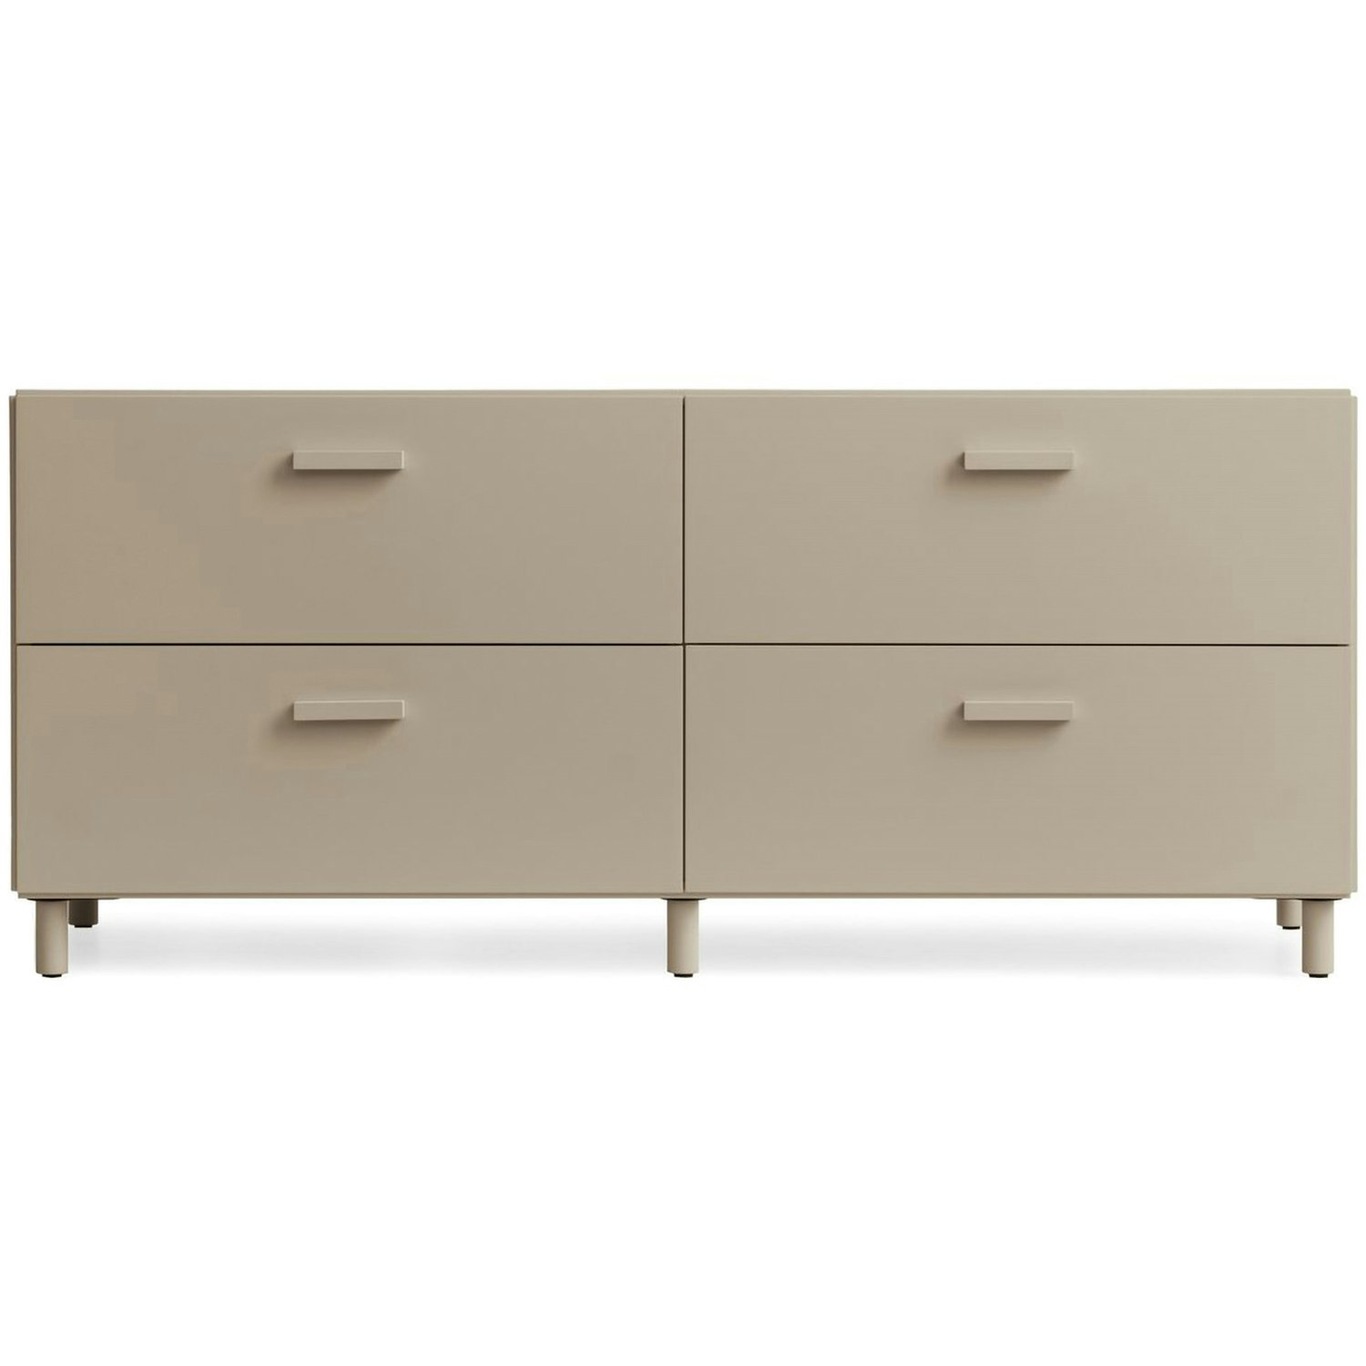 Relief Chest Of Drawers Low With Legs, Beige